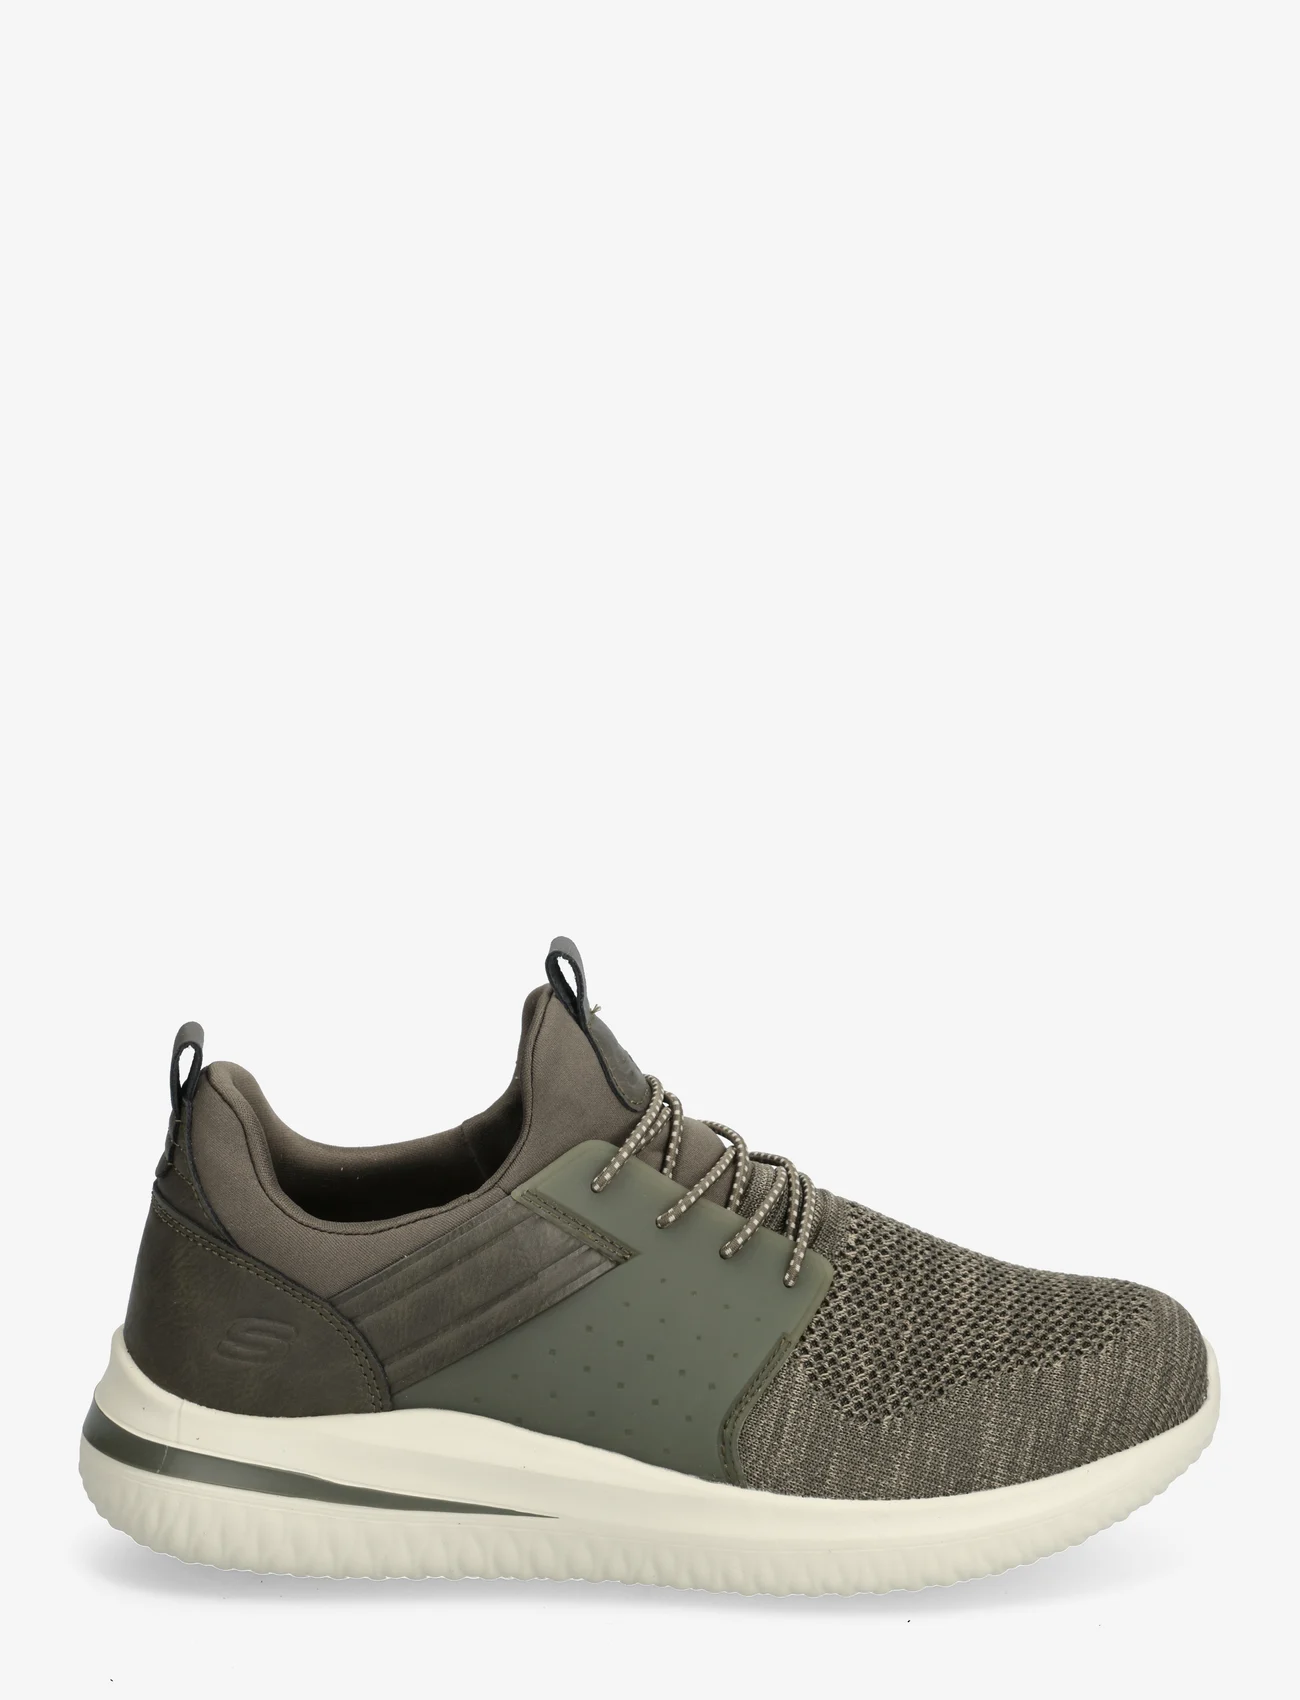 Skechers - Mens Delson 3.0 - Cicada - laag sneakers - olv olive - 1